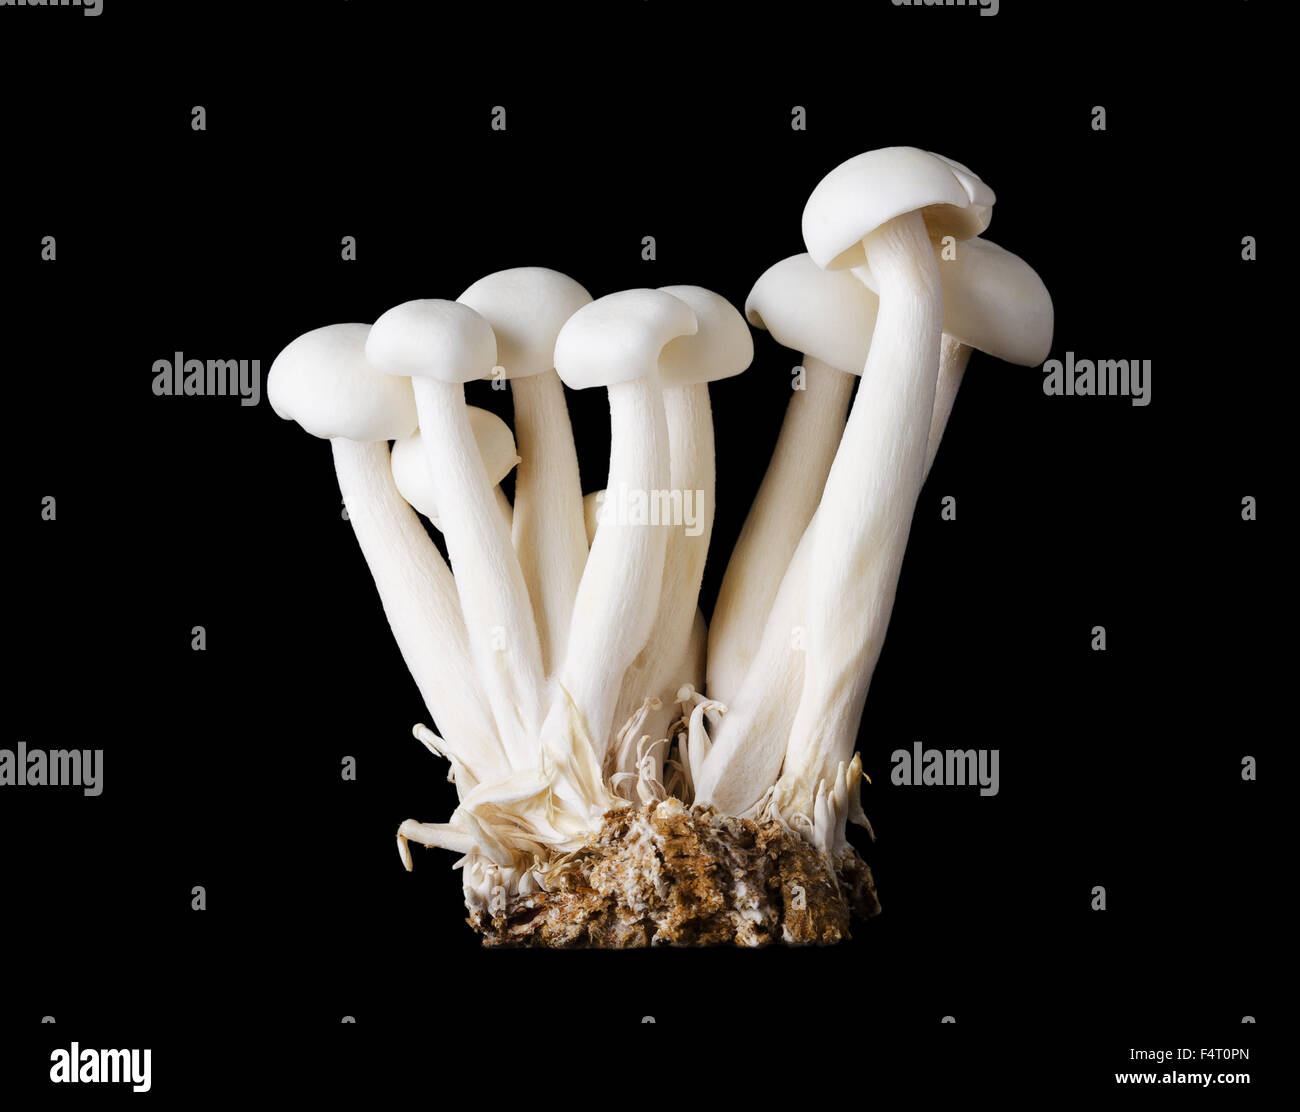 Small group of white beech mushrooms, bunapi shimeji, also called white clamshell mushrooms, an edible fungus. Black background. Stock Photo